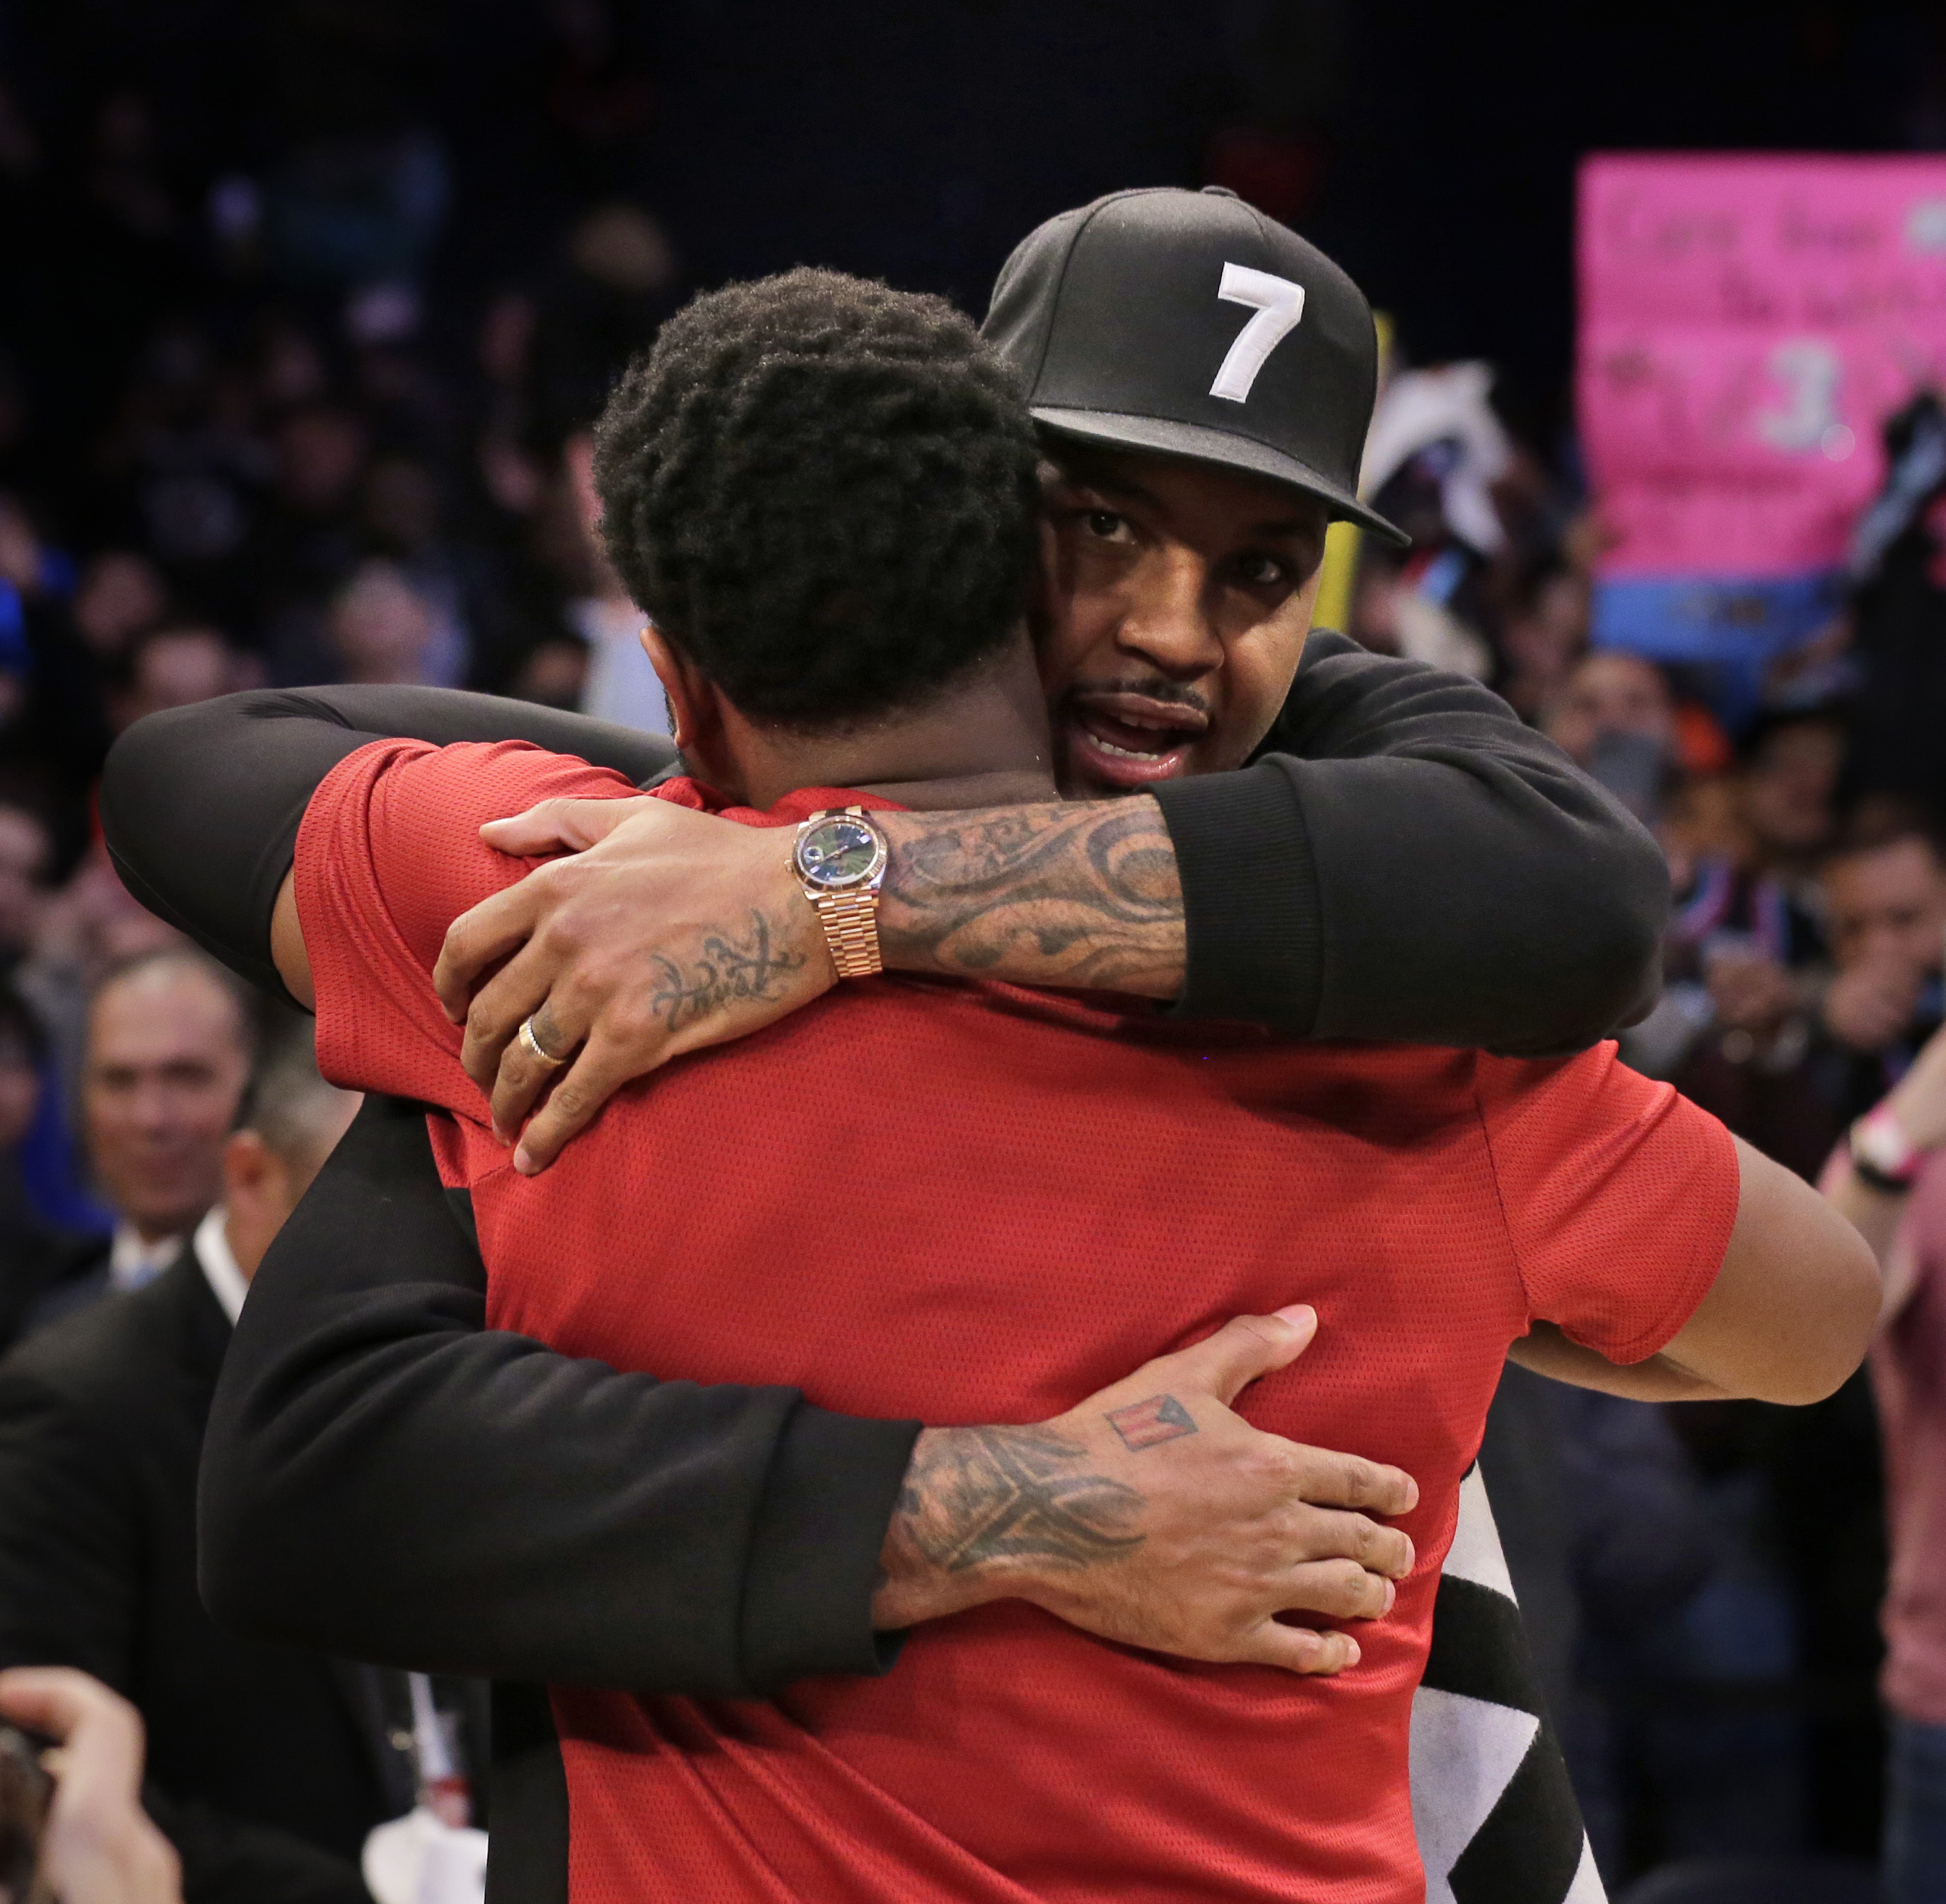 Wade's visit brings Carmelo back to Madison Square Garden